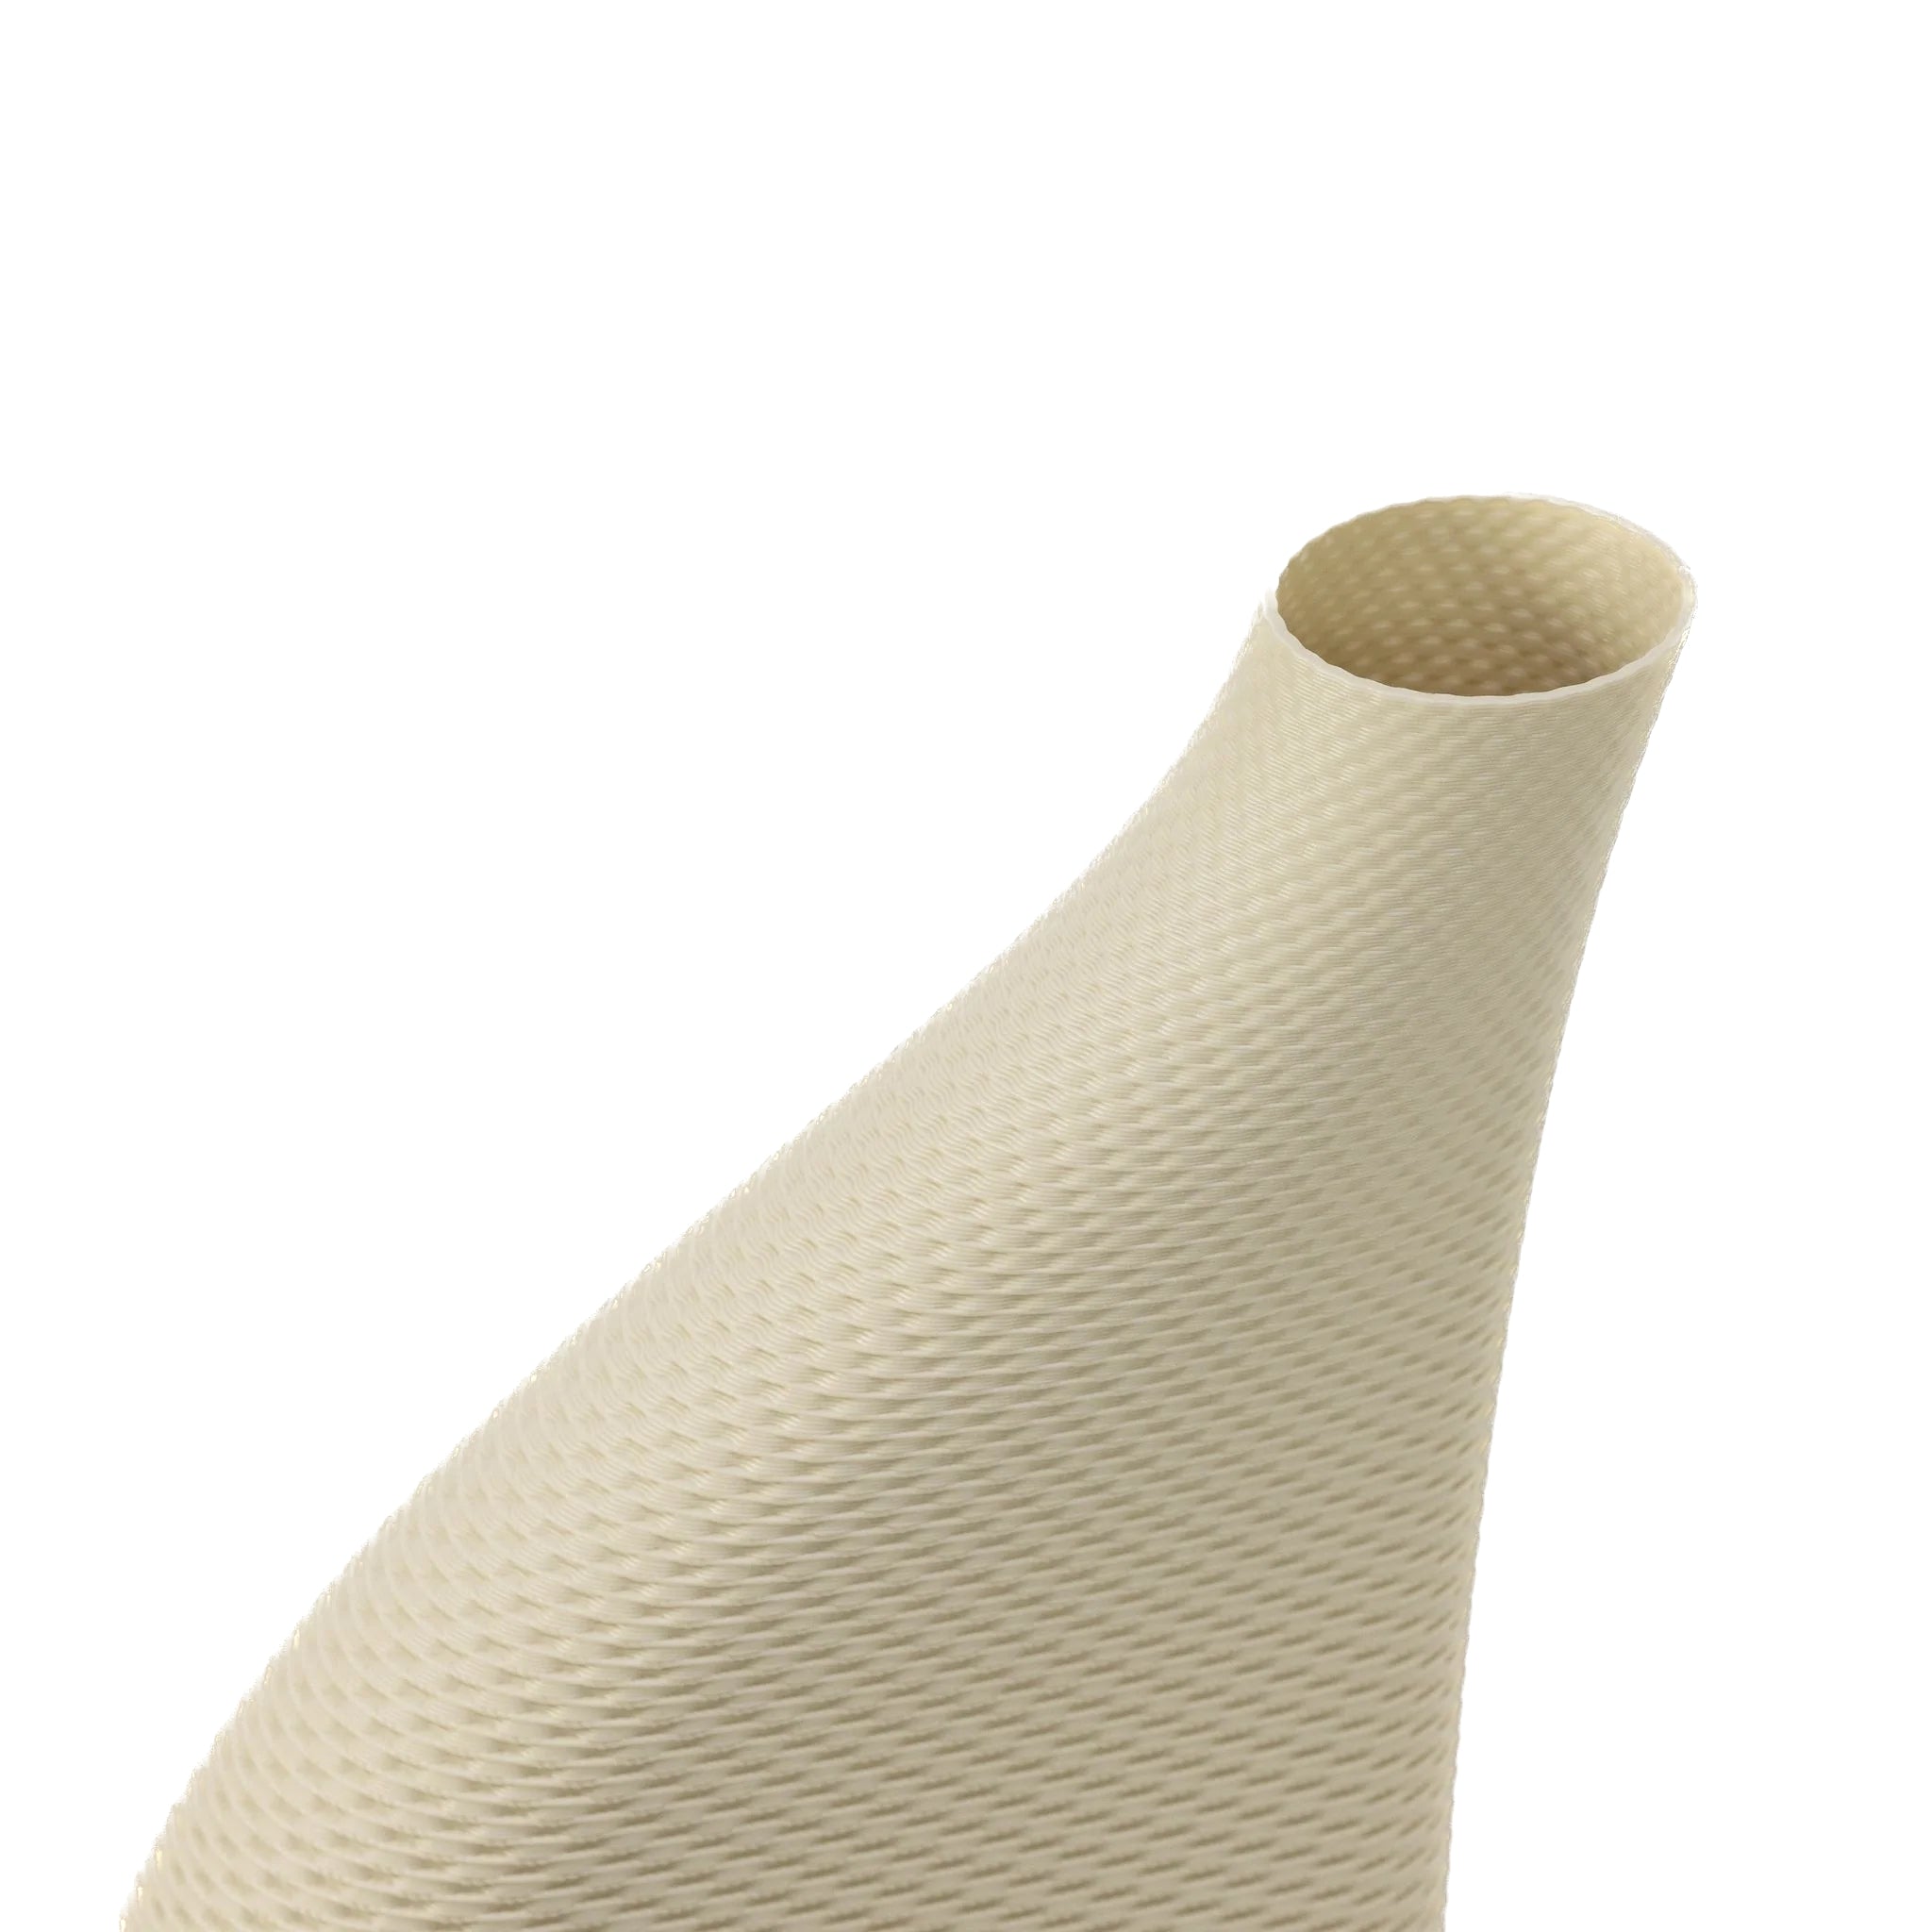 Close up of the Cyrc wicker vase in eggshell. 3D printed recycled plastic. Product placed in front of a white background